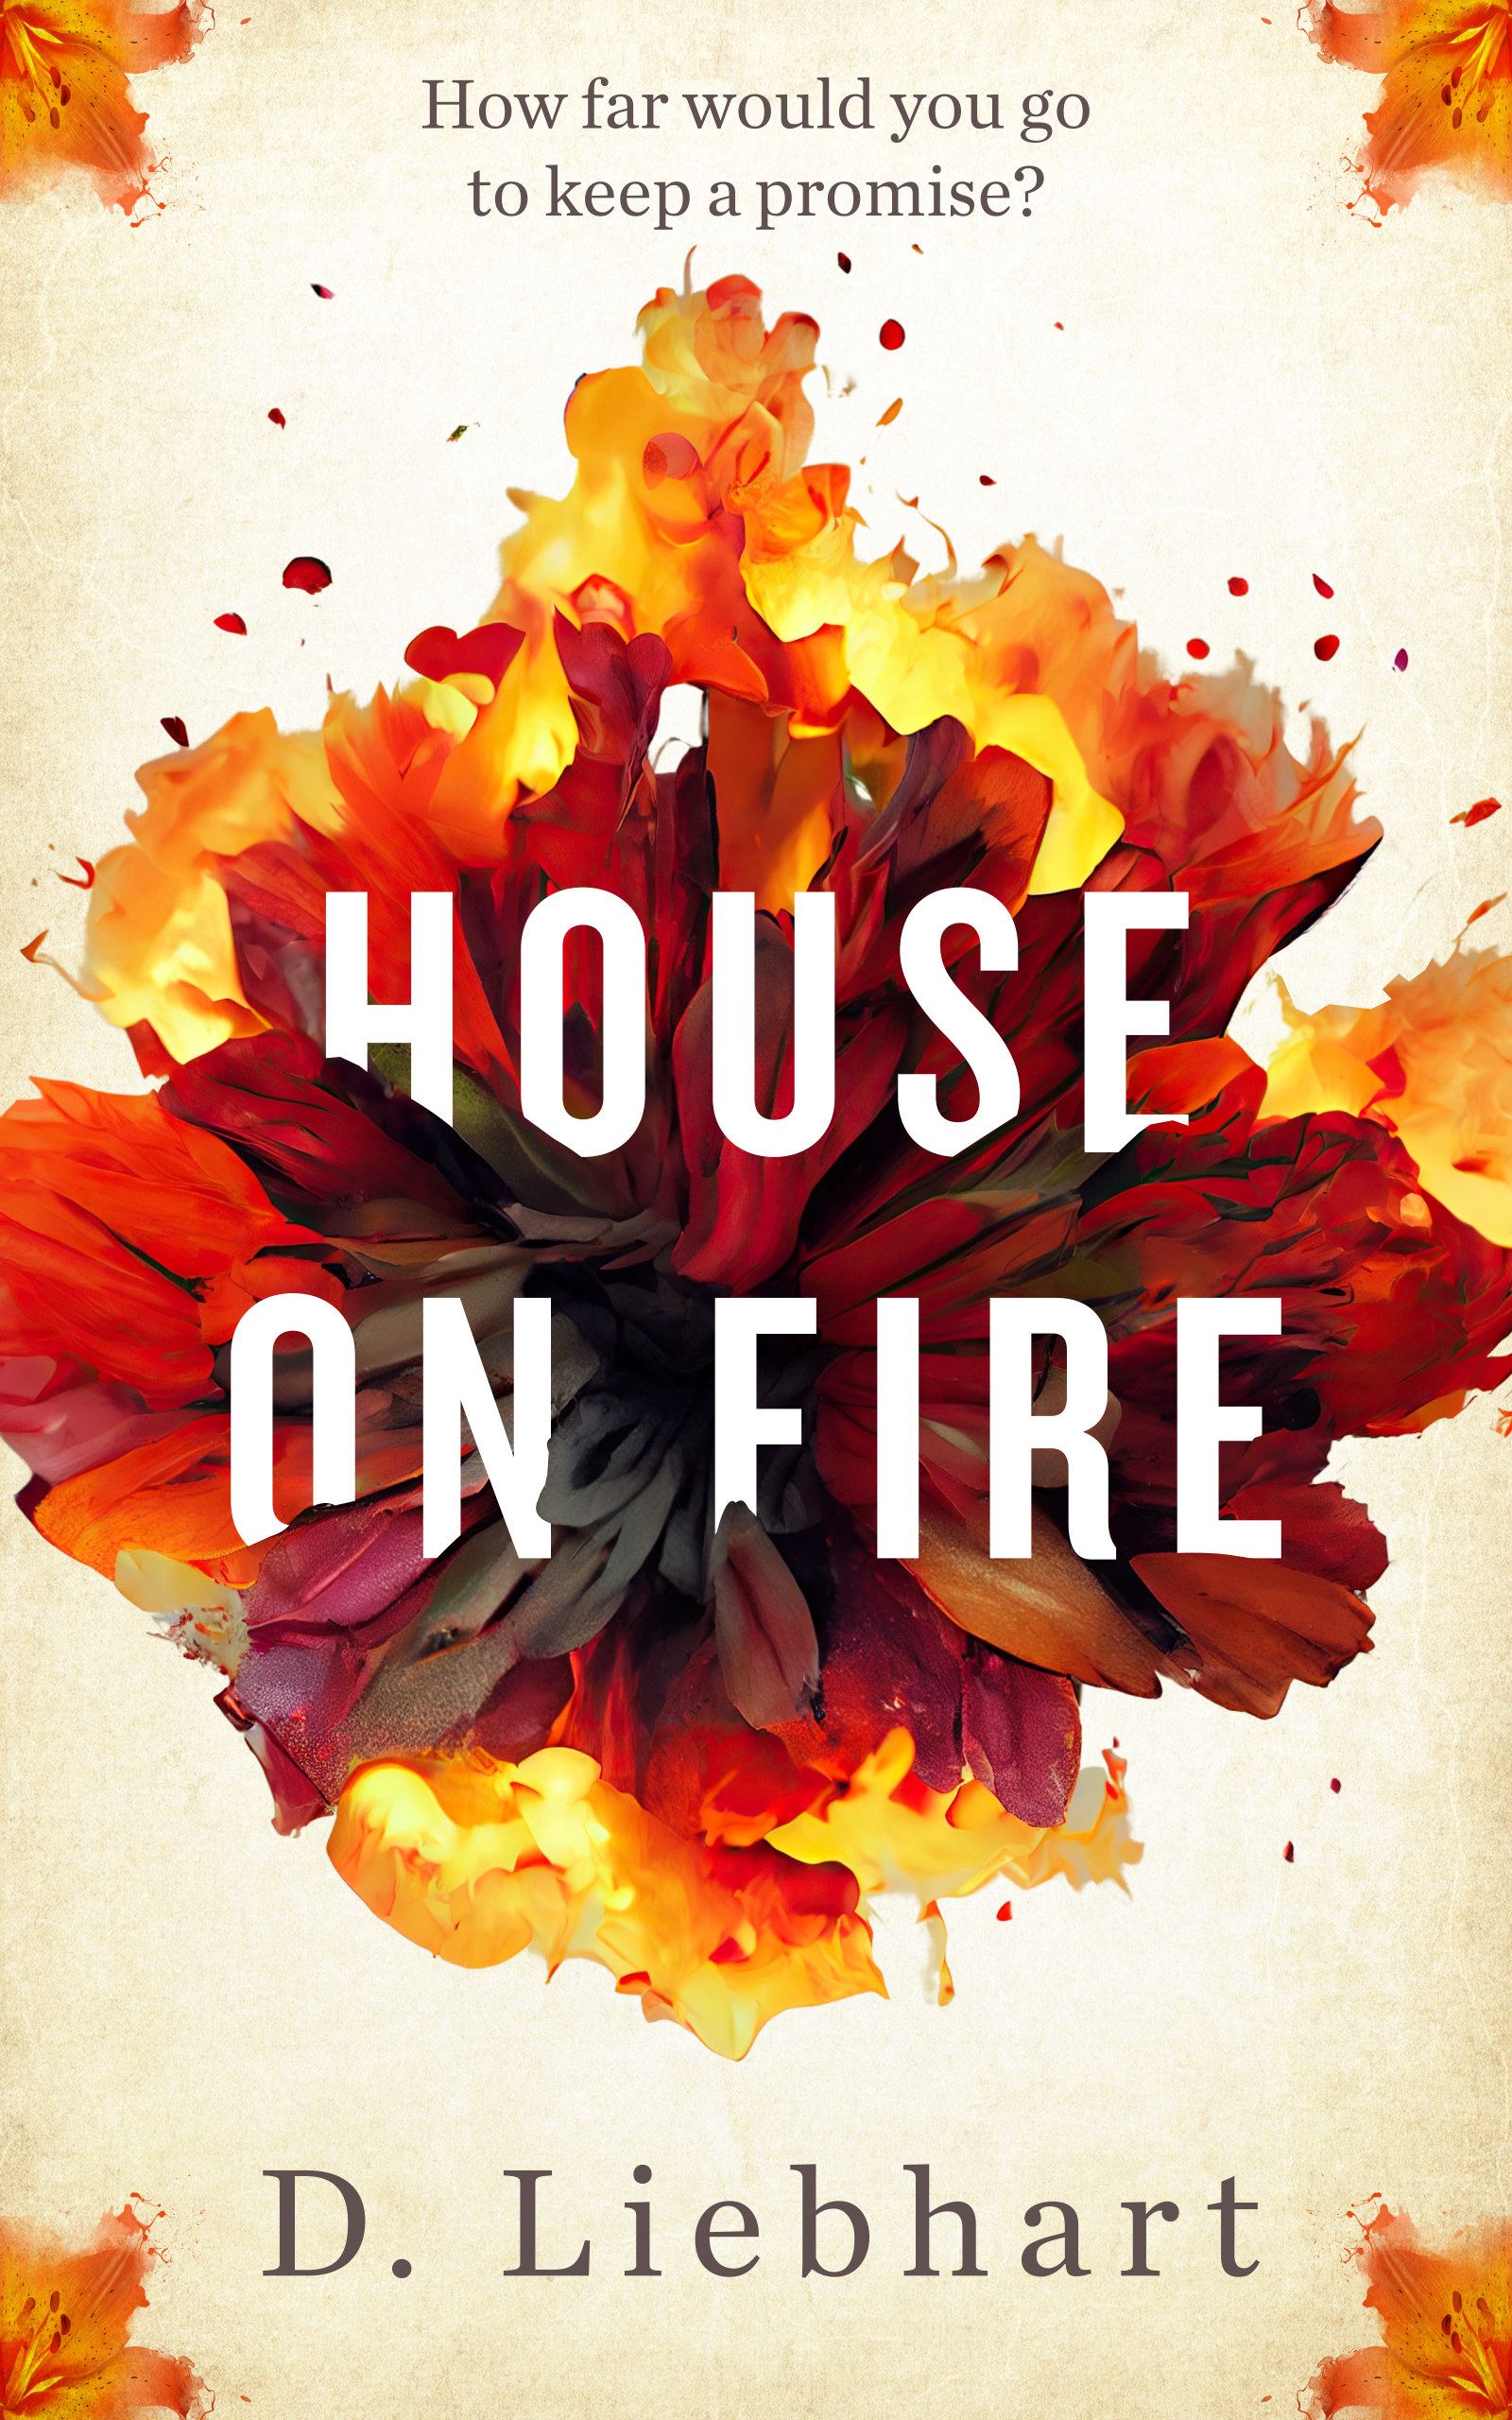 House on Fire by D. Liebhart